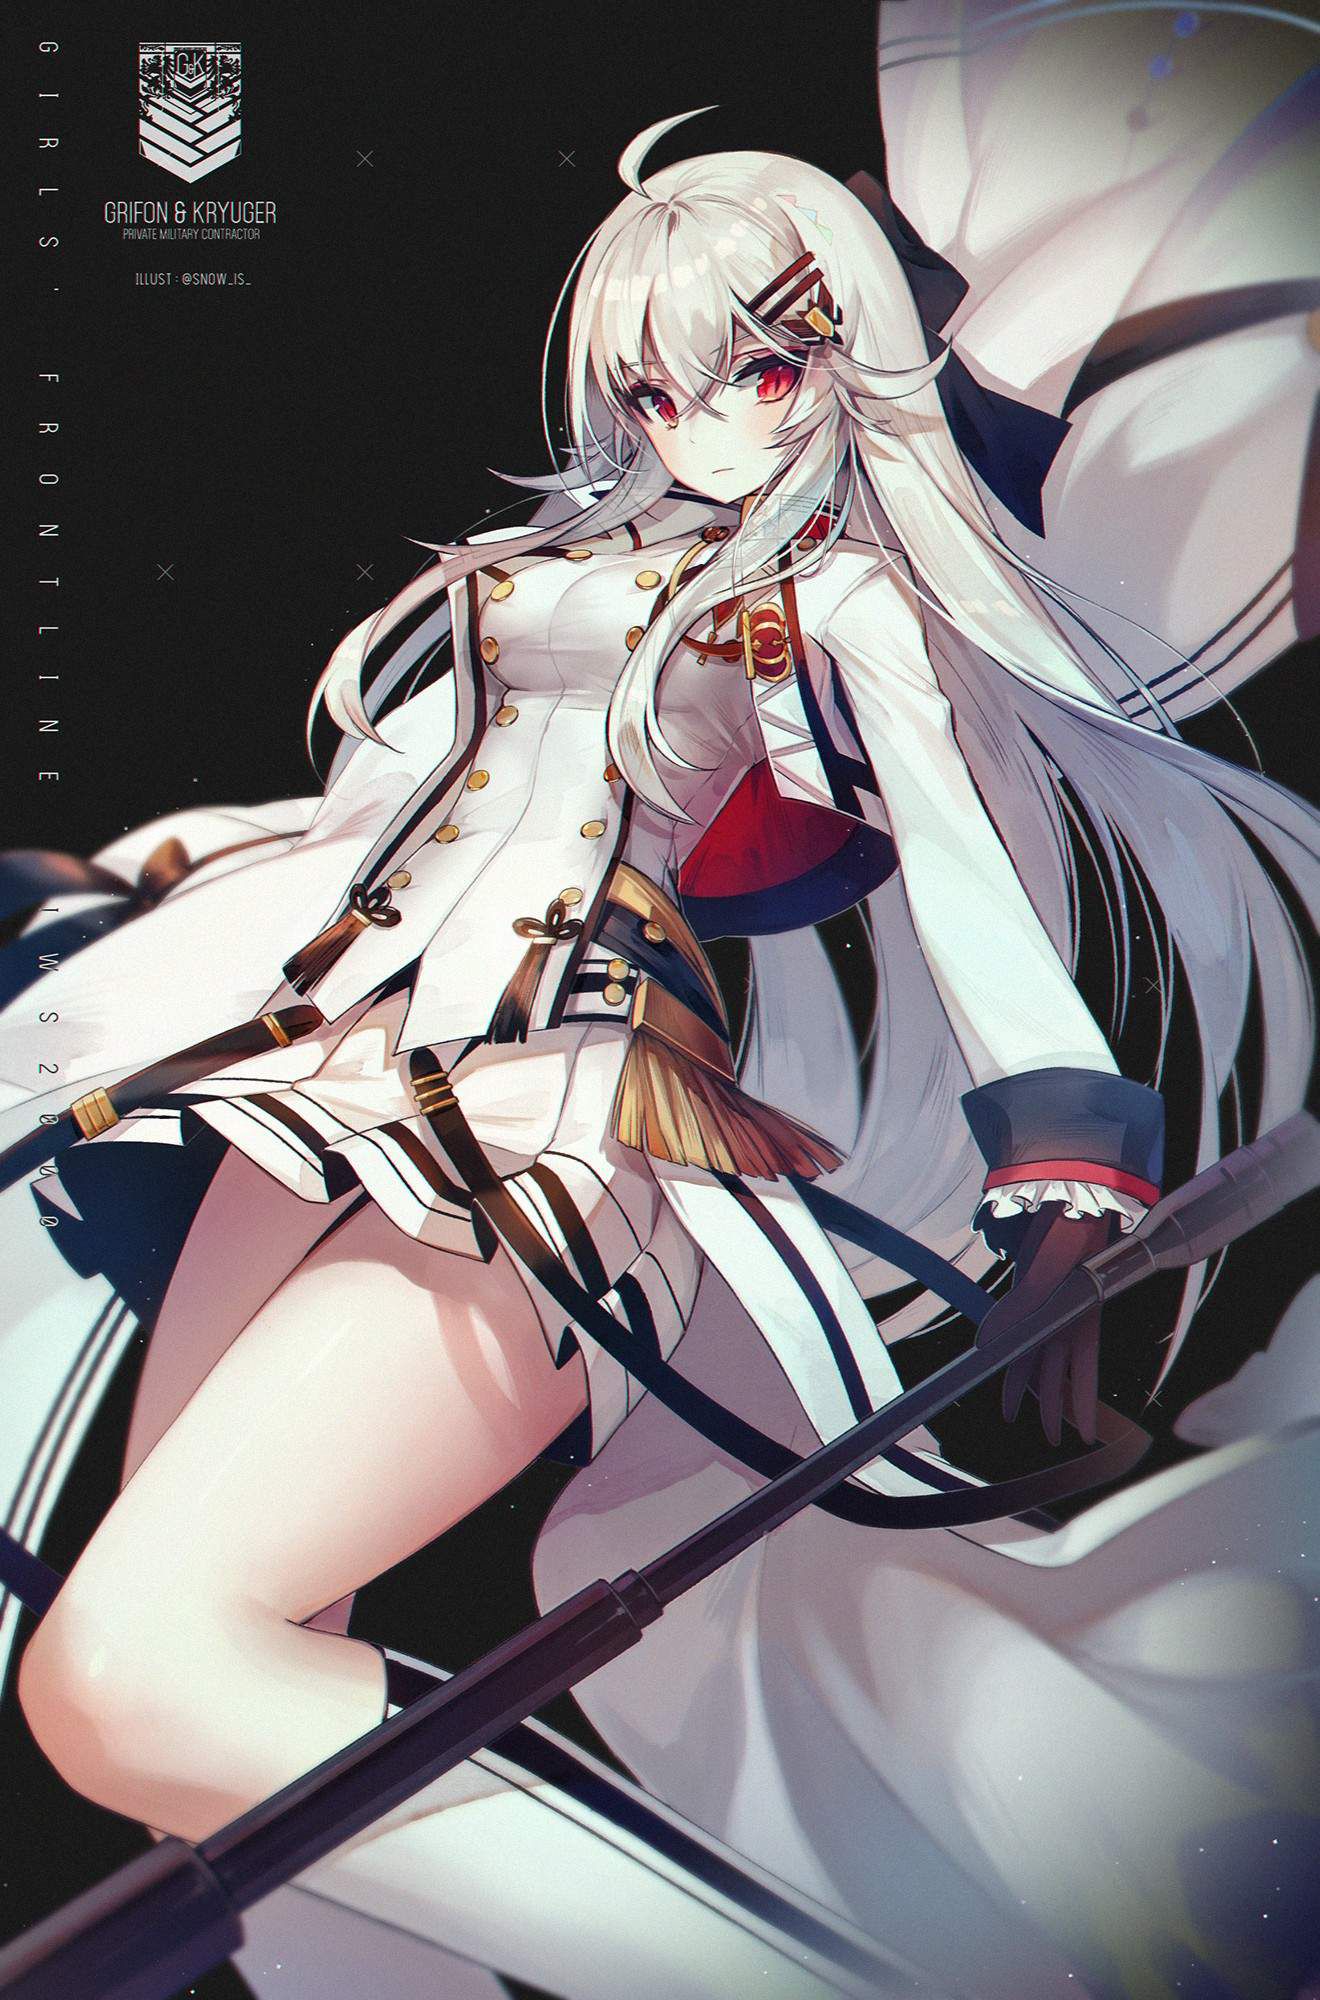 IWS2000's erotic secondary erotic images are full of boobs! [Dolls Frontline] 2